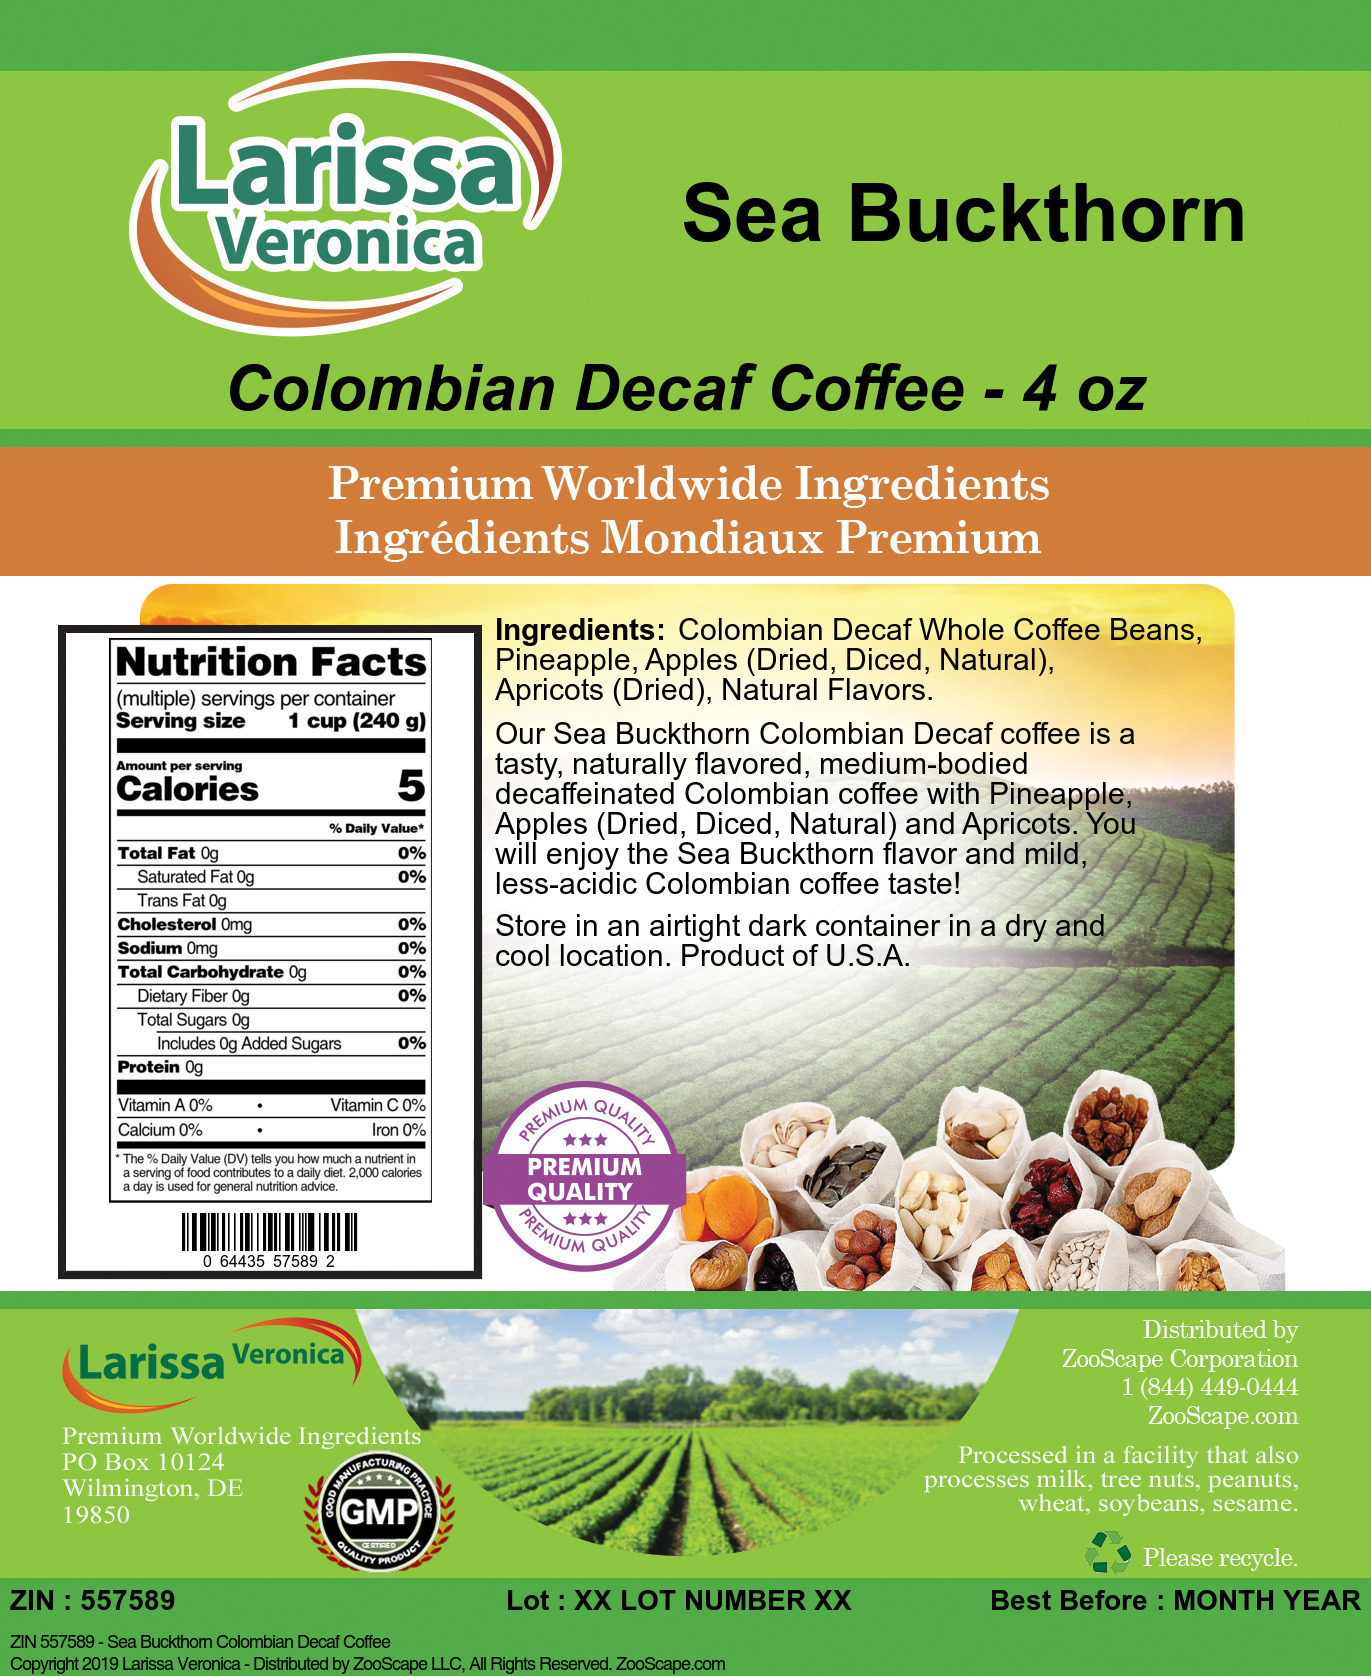 Sea Buckthorn Colombian Decaf Coffee - Label